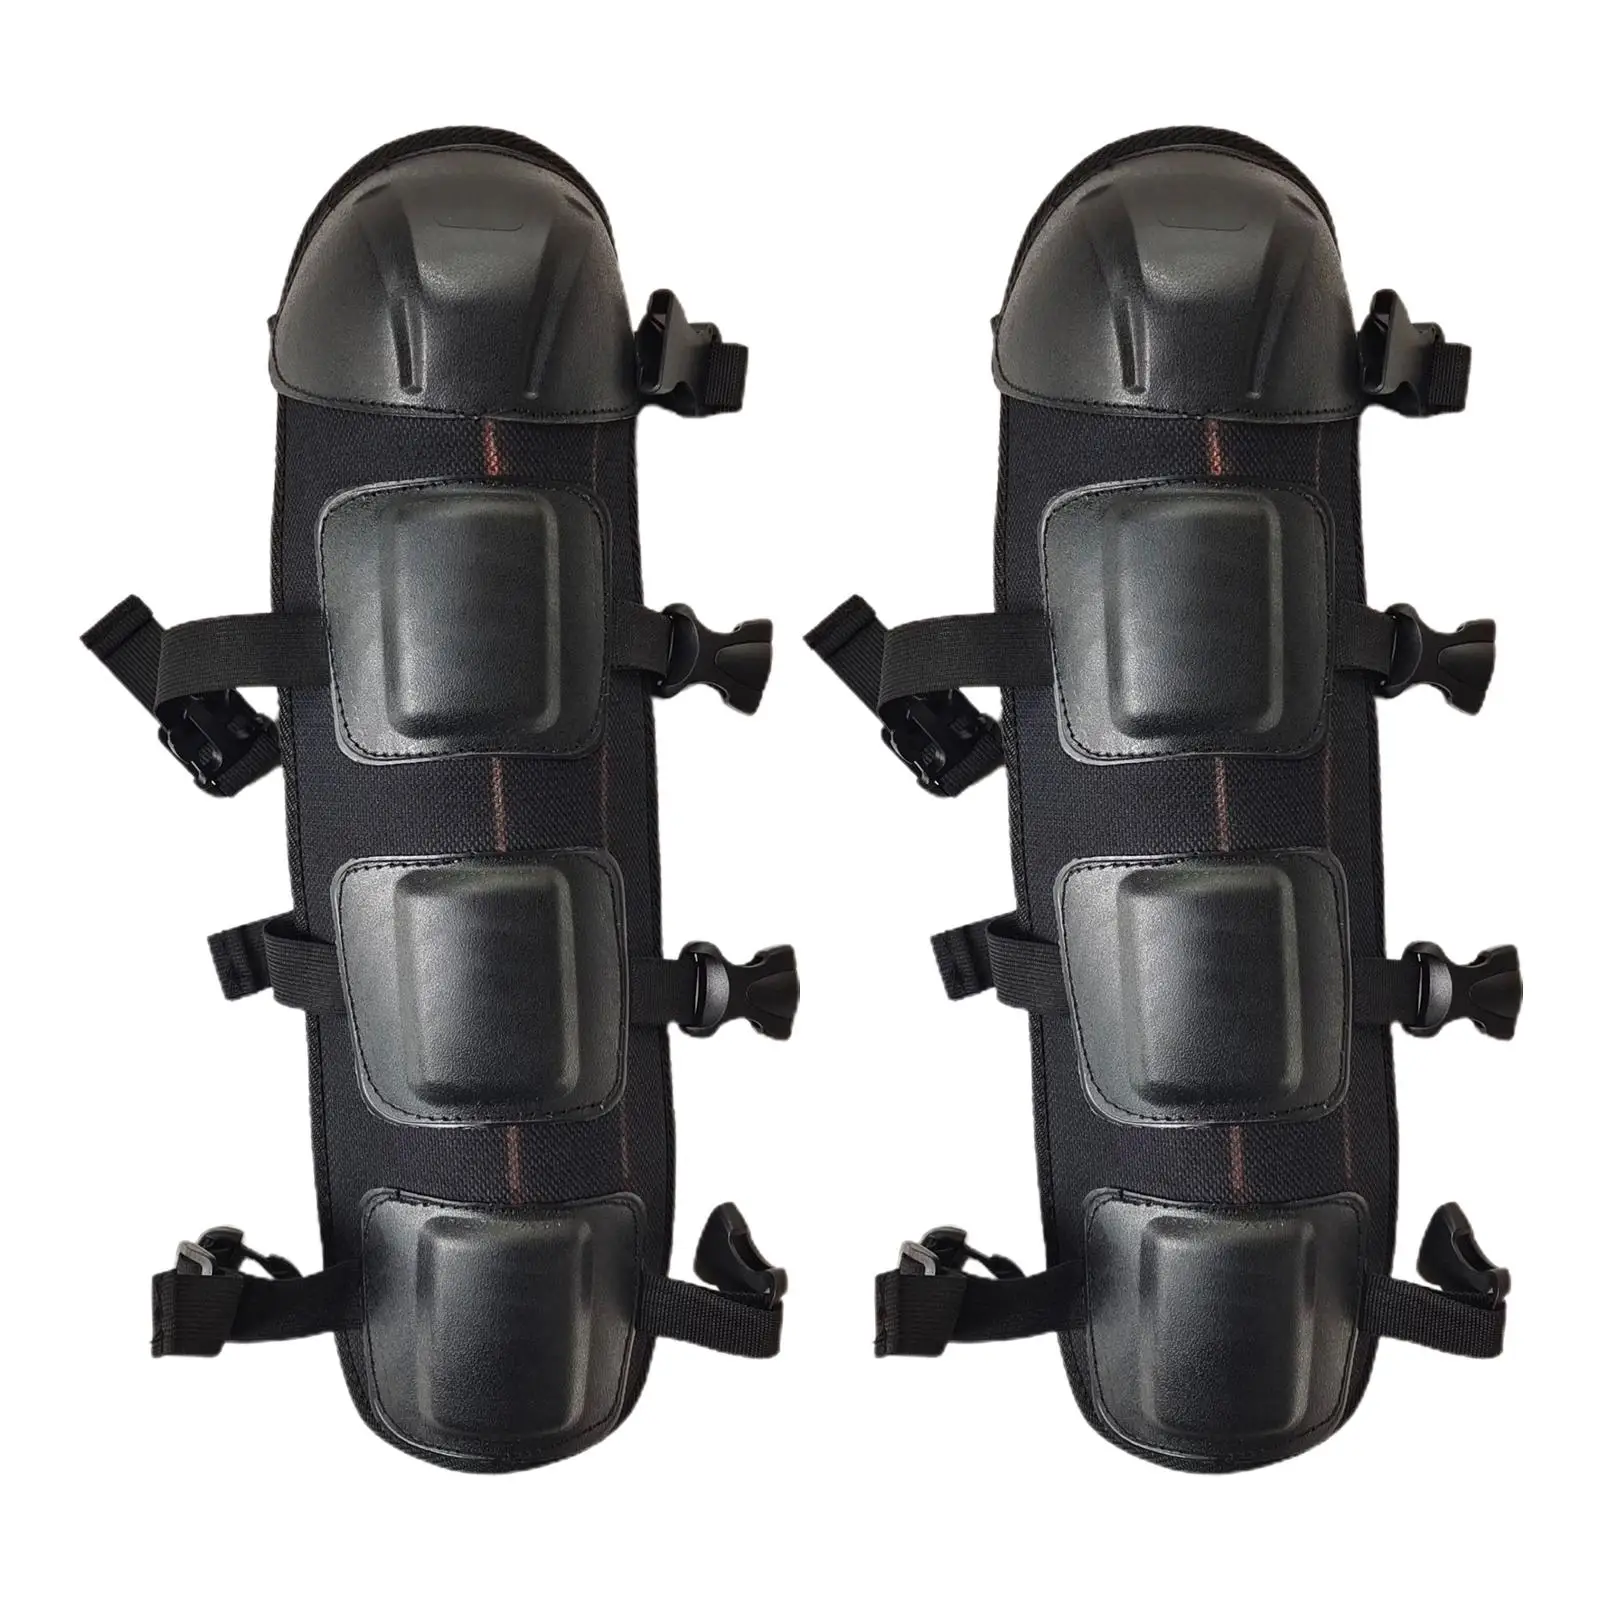 Knee Pads Protective Kneelet Protective Gear Adjustable Straps for Construction